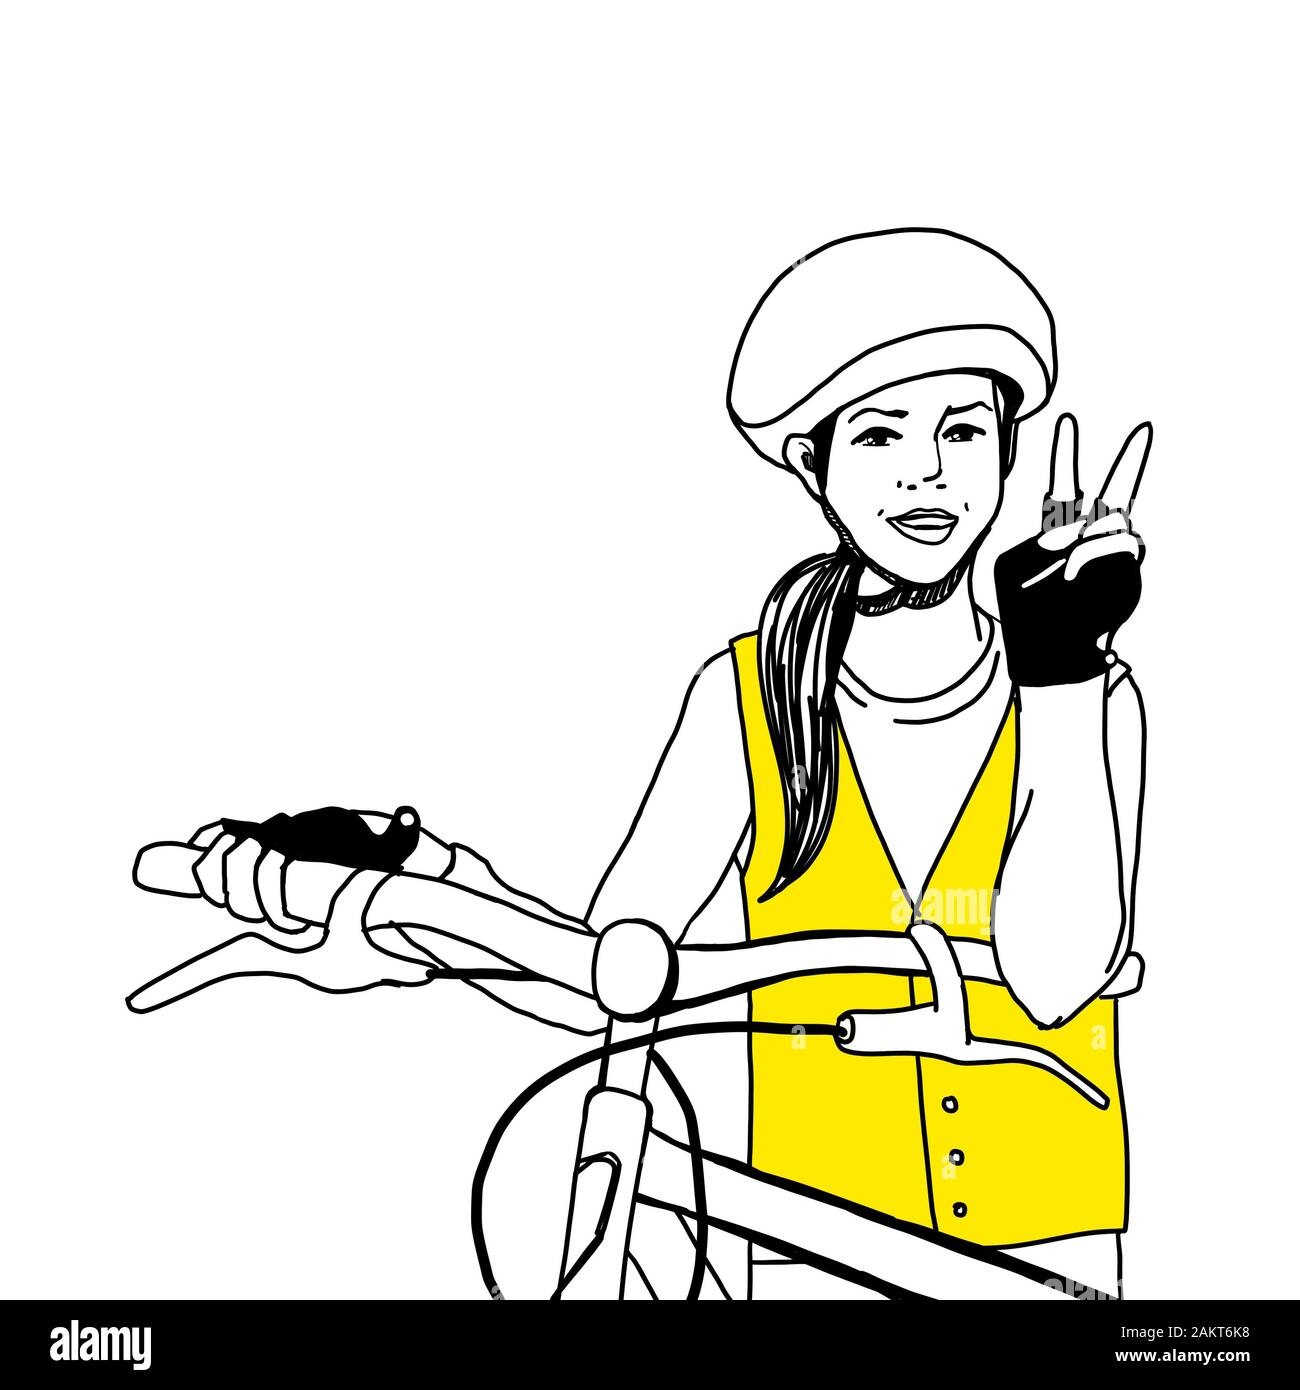 Smiling girl is wearing a helmet and  reflective safety vest and riding a bicycle. Sketch style black line on white background and yellow vest. Drawn Stock Photo